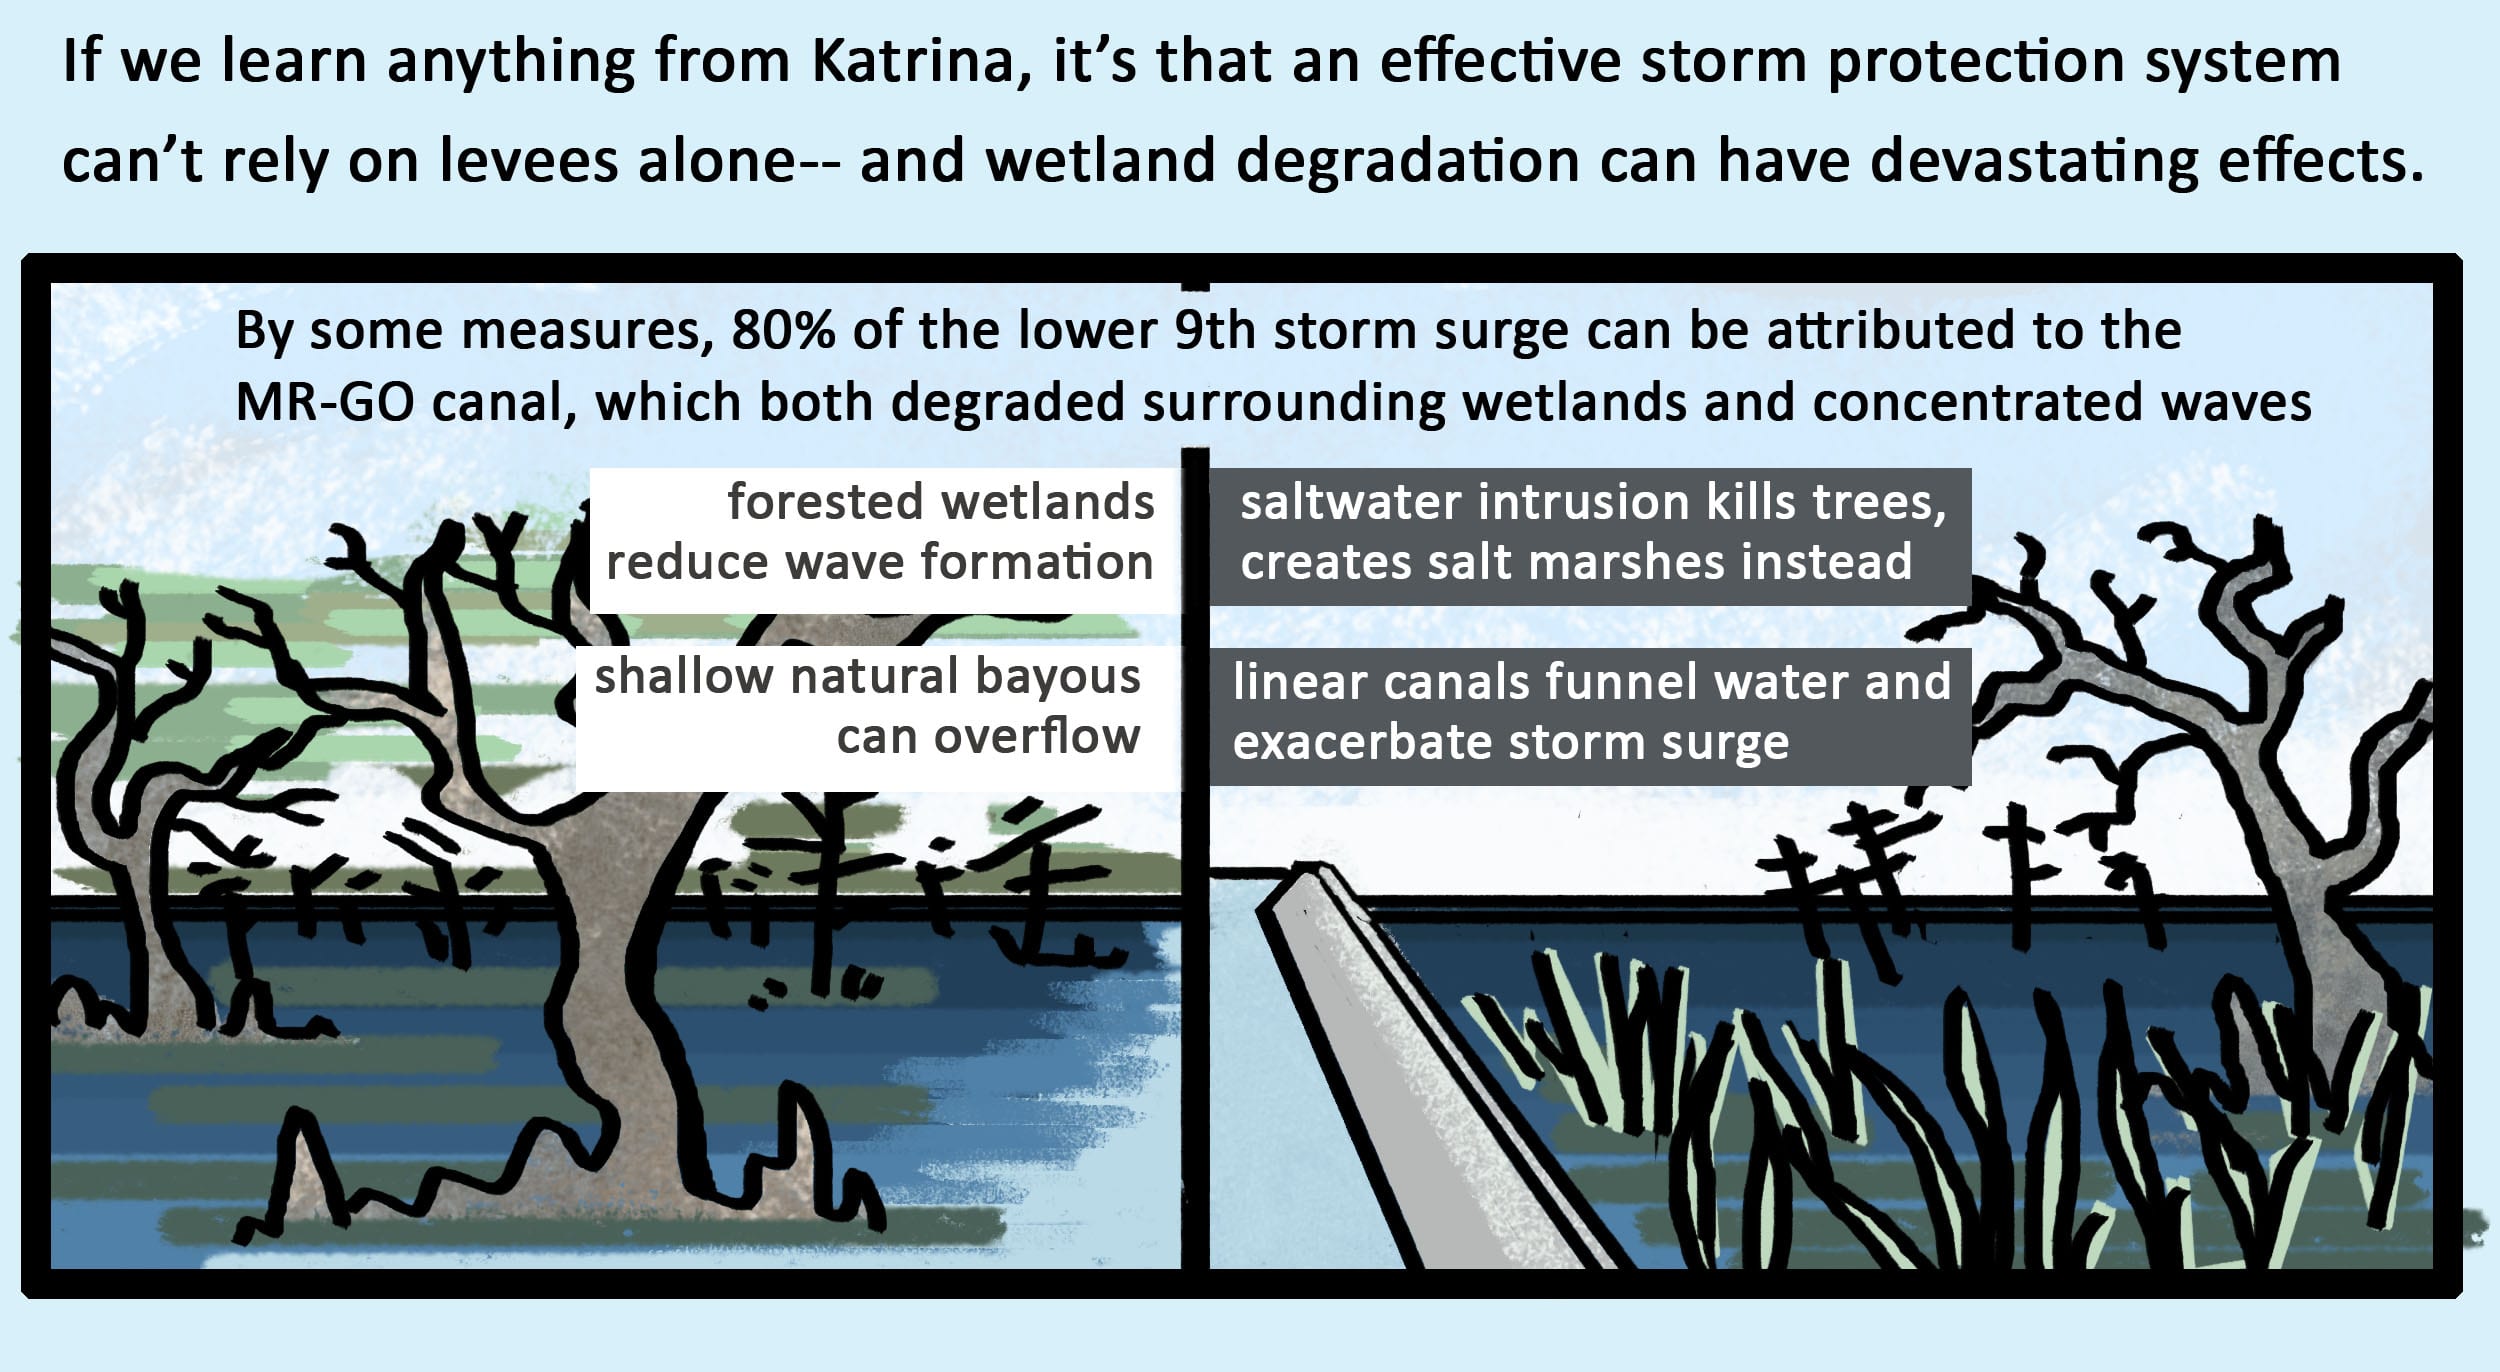 An effective storm protection system depends on levees as well as healthy wetlands